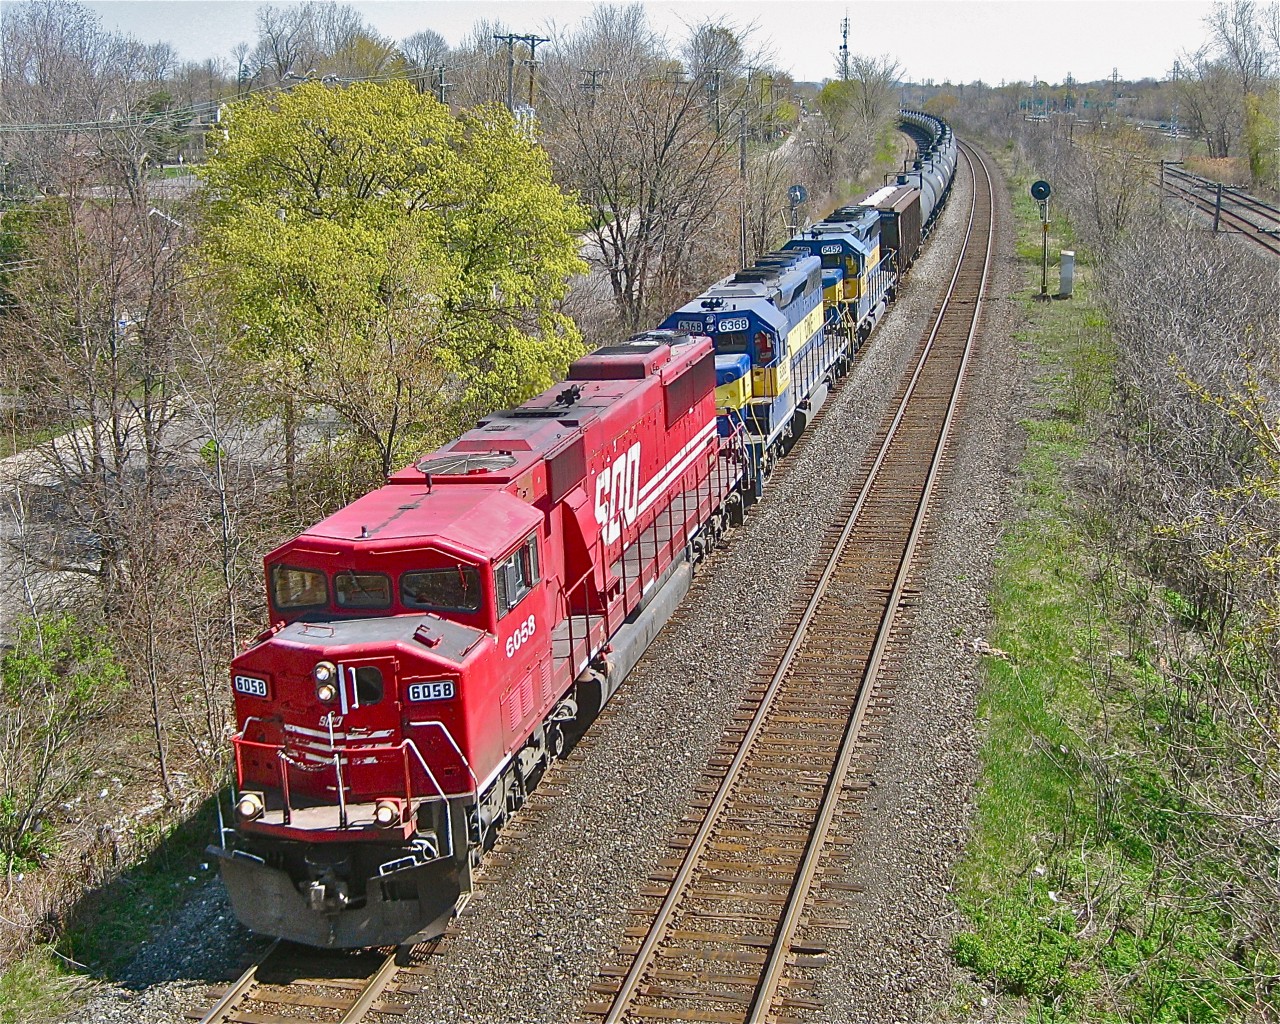 SOO 6058, DME 6368 ("City of Claremont") & ICE 6452 ("City of St. Paul") head west through Beaconsfield with an empty unit train.